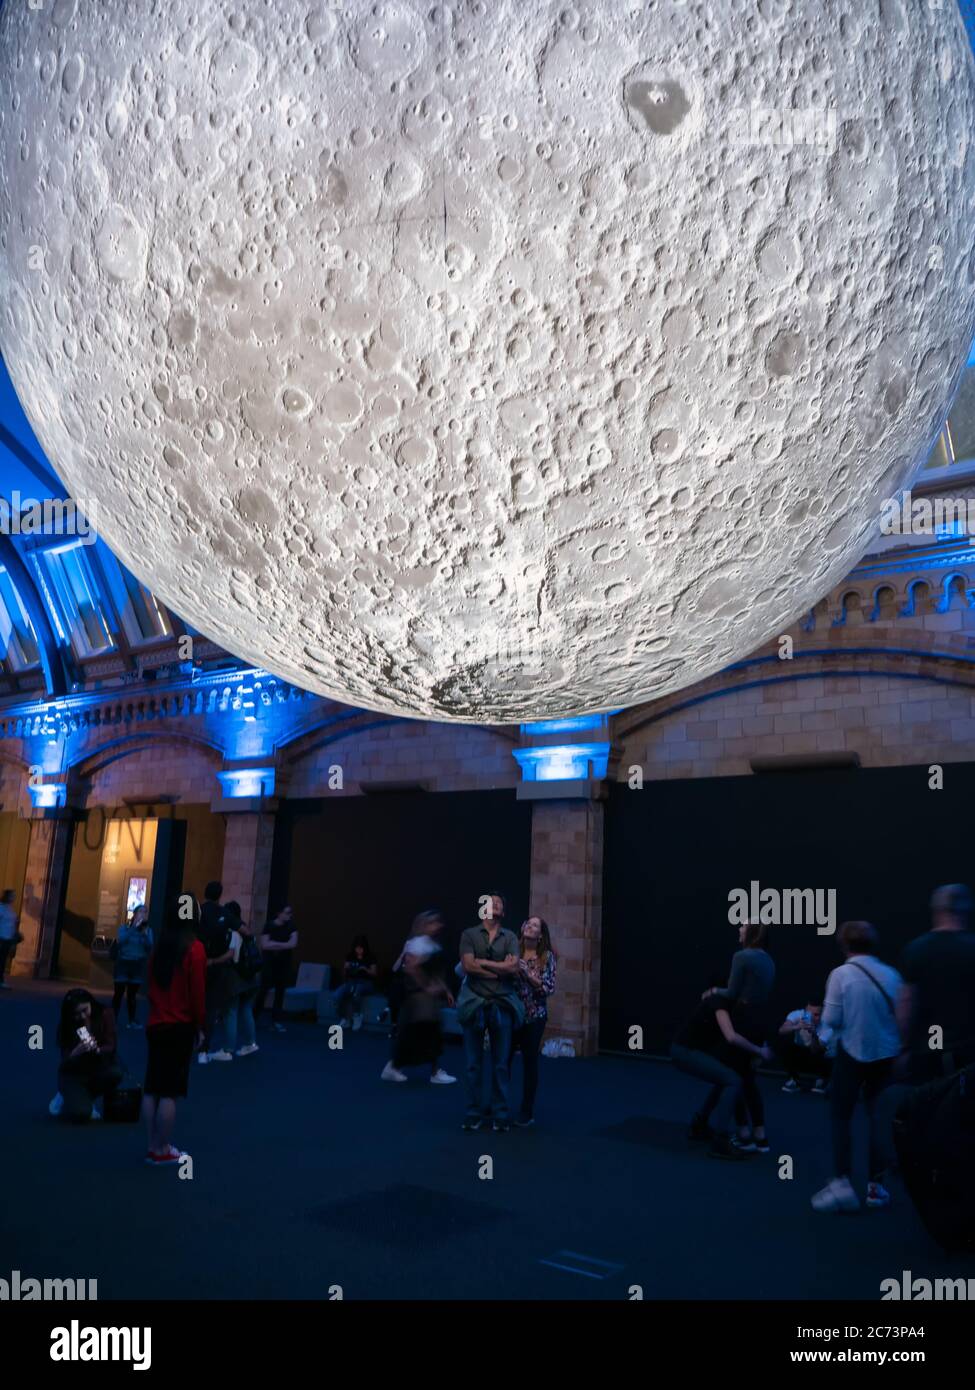 London, United Kingdom. Circa December 2019. Tourist enjoying an exposition about the moon in Natural History Museum of London. Stock Photo